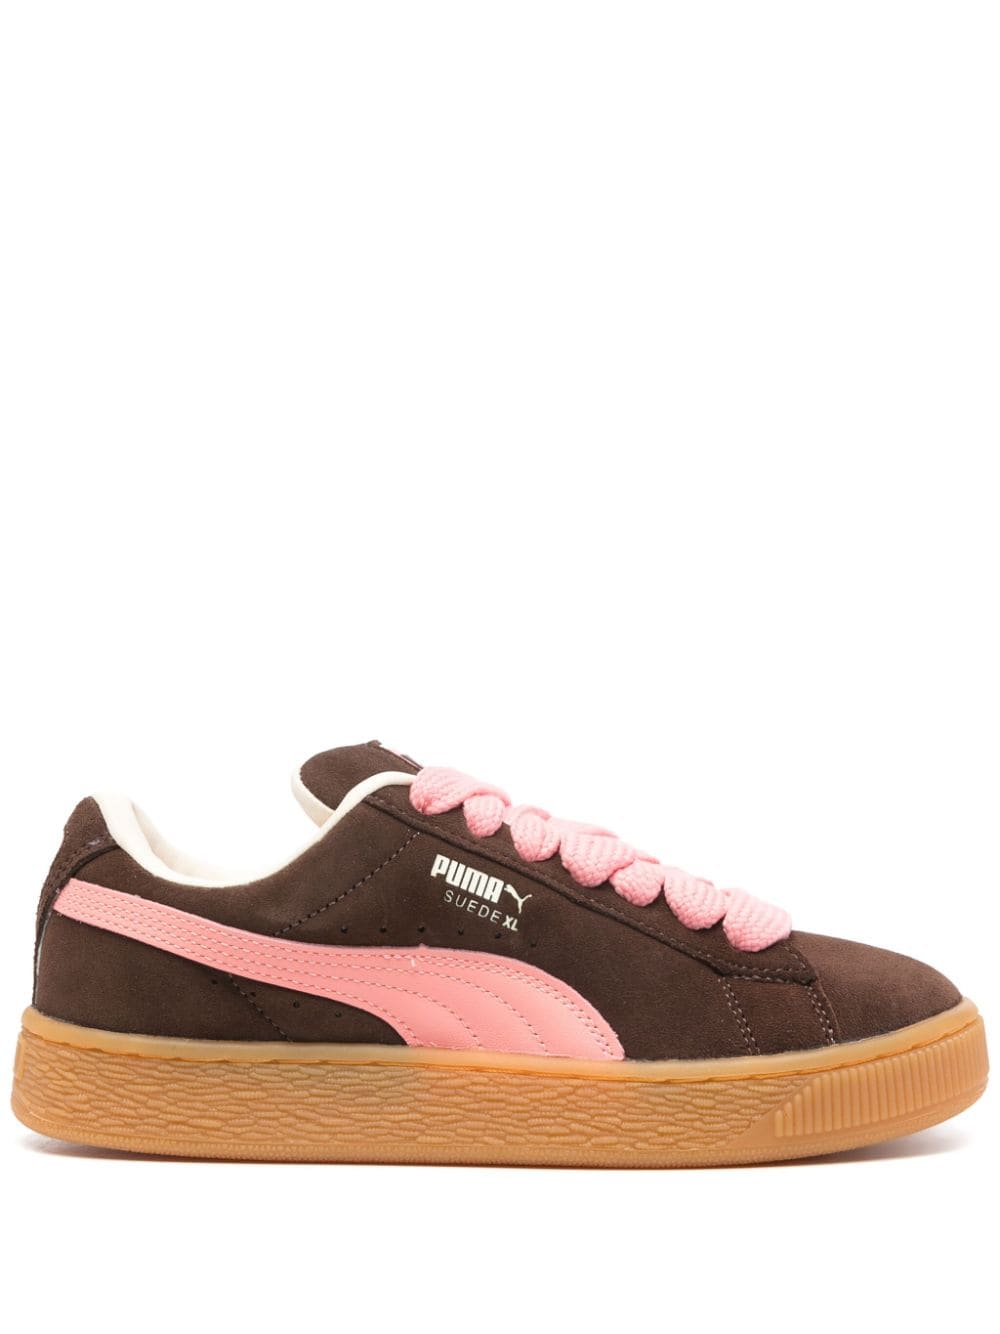 PUMA Suede XL padded sneakers Bruin